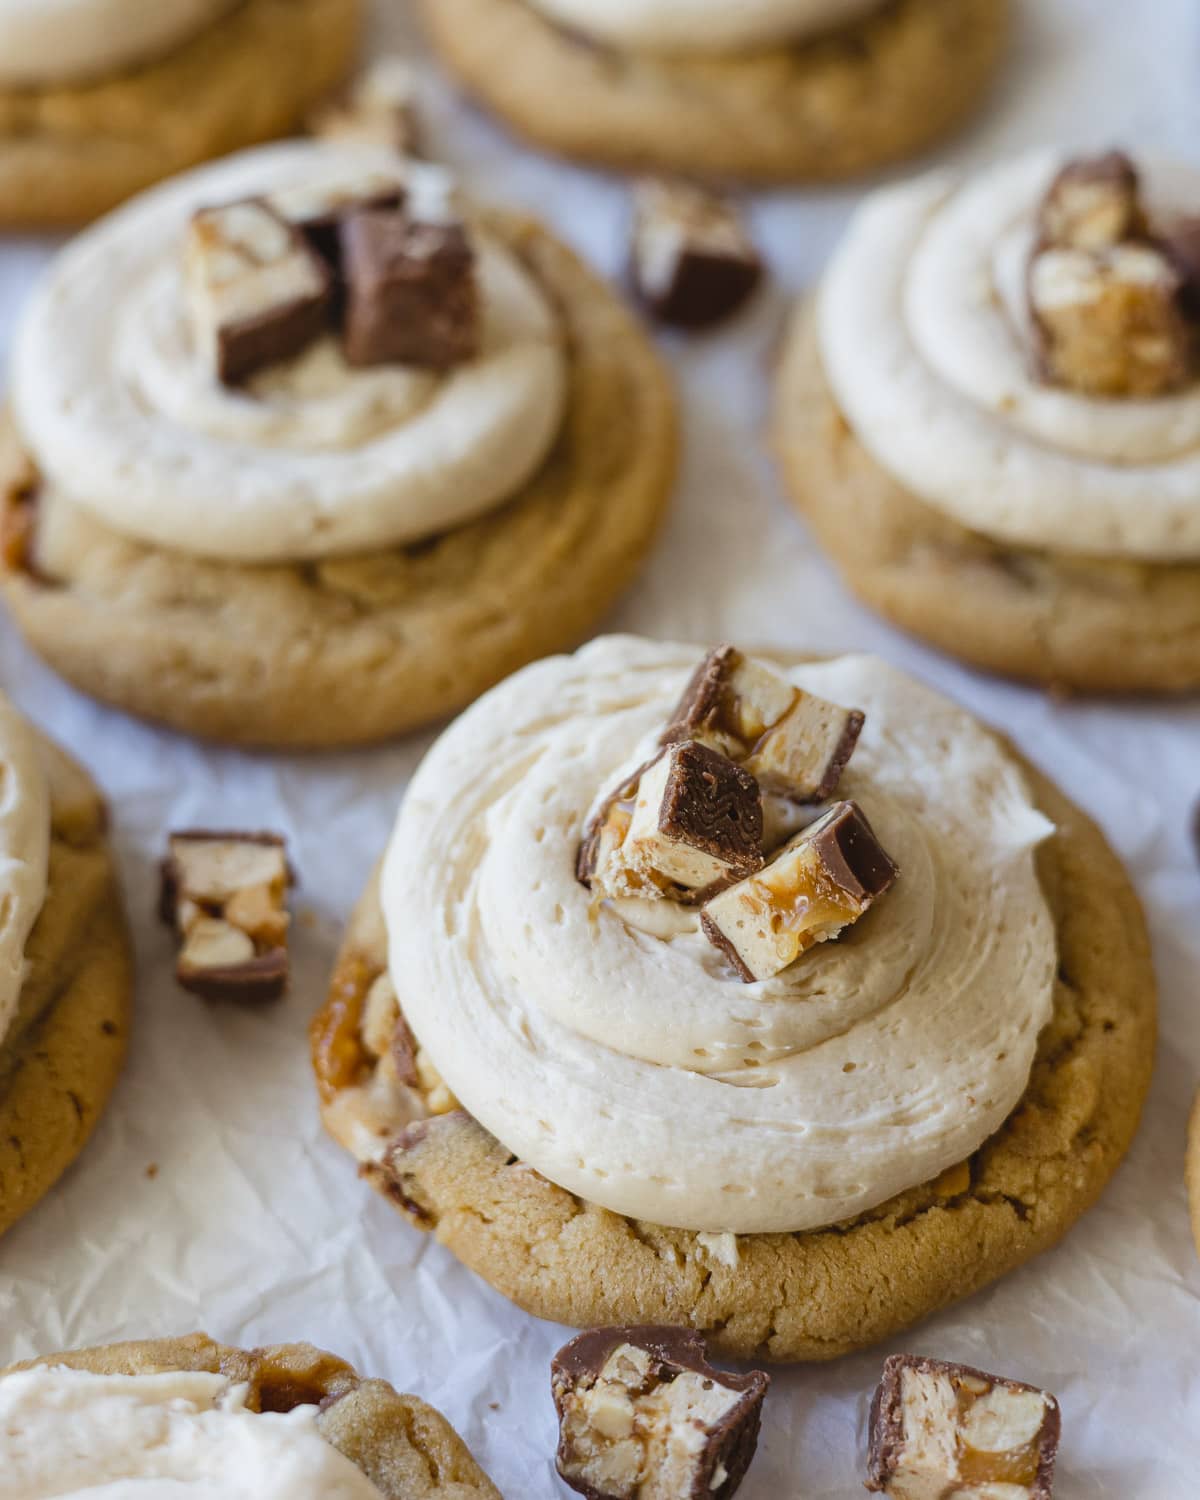 A peanut butter cookie topped with caramel buttercream and chopped Snickers pieces.